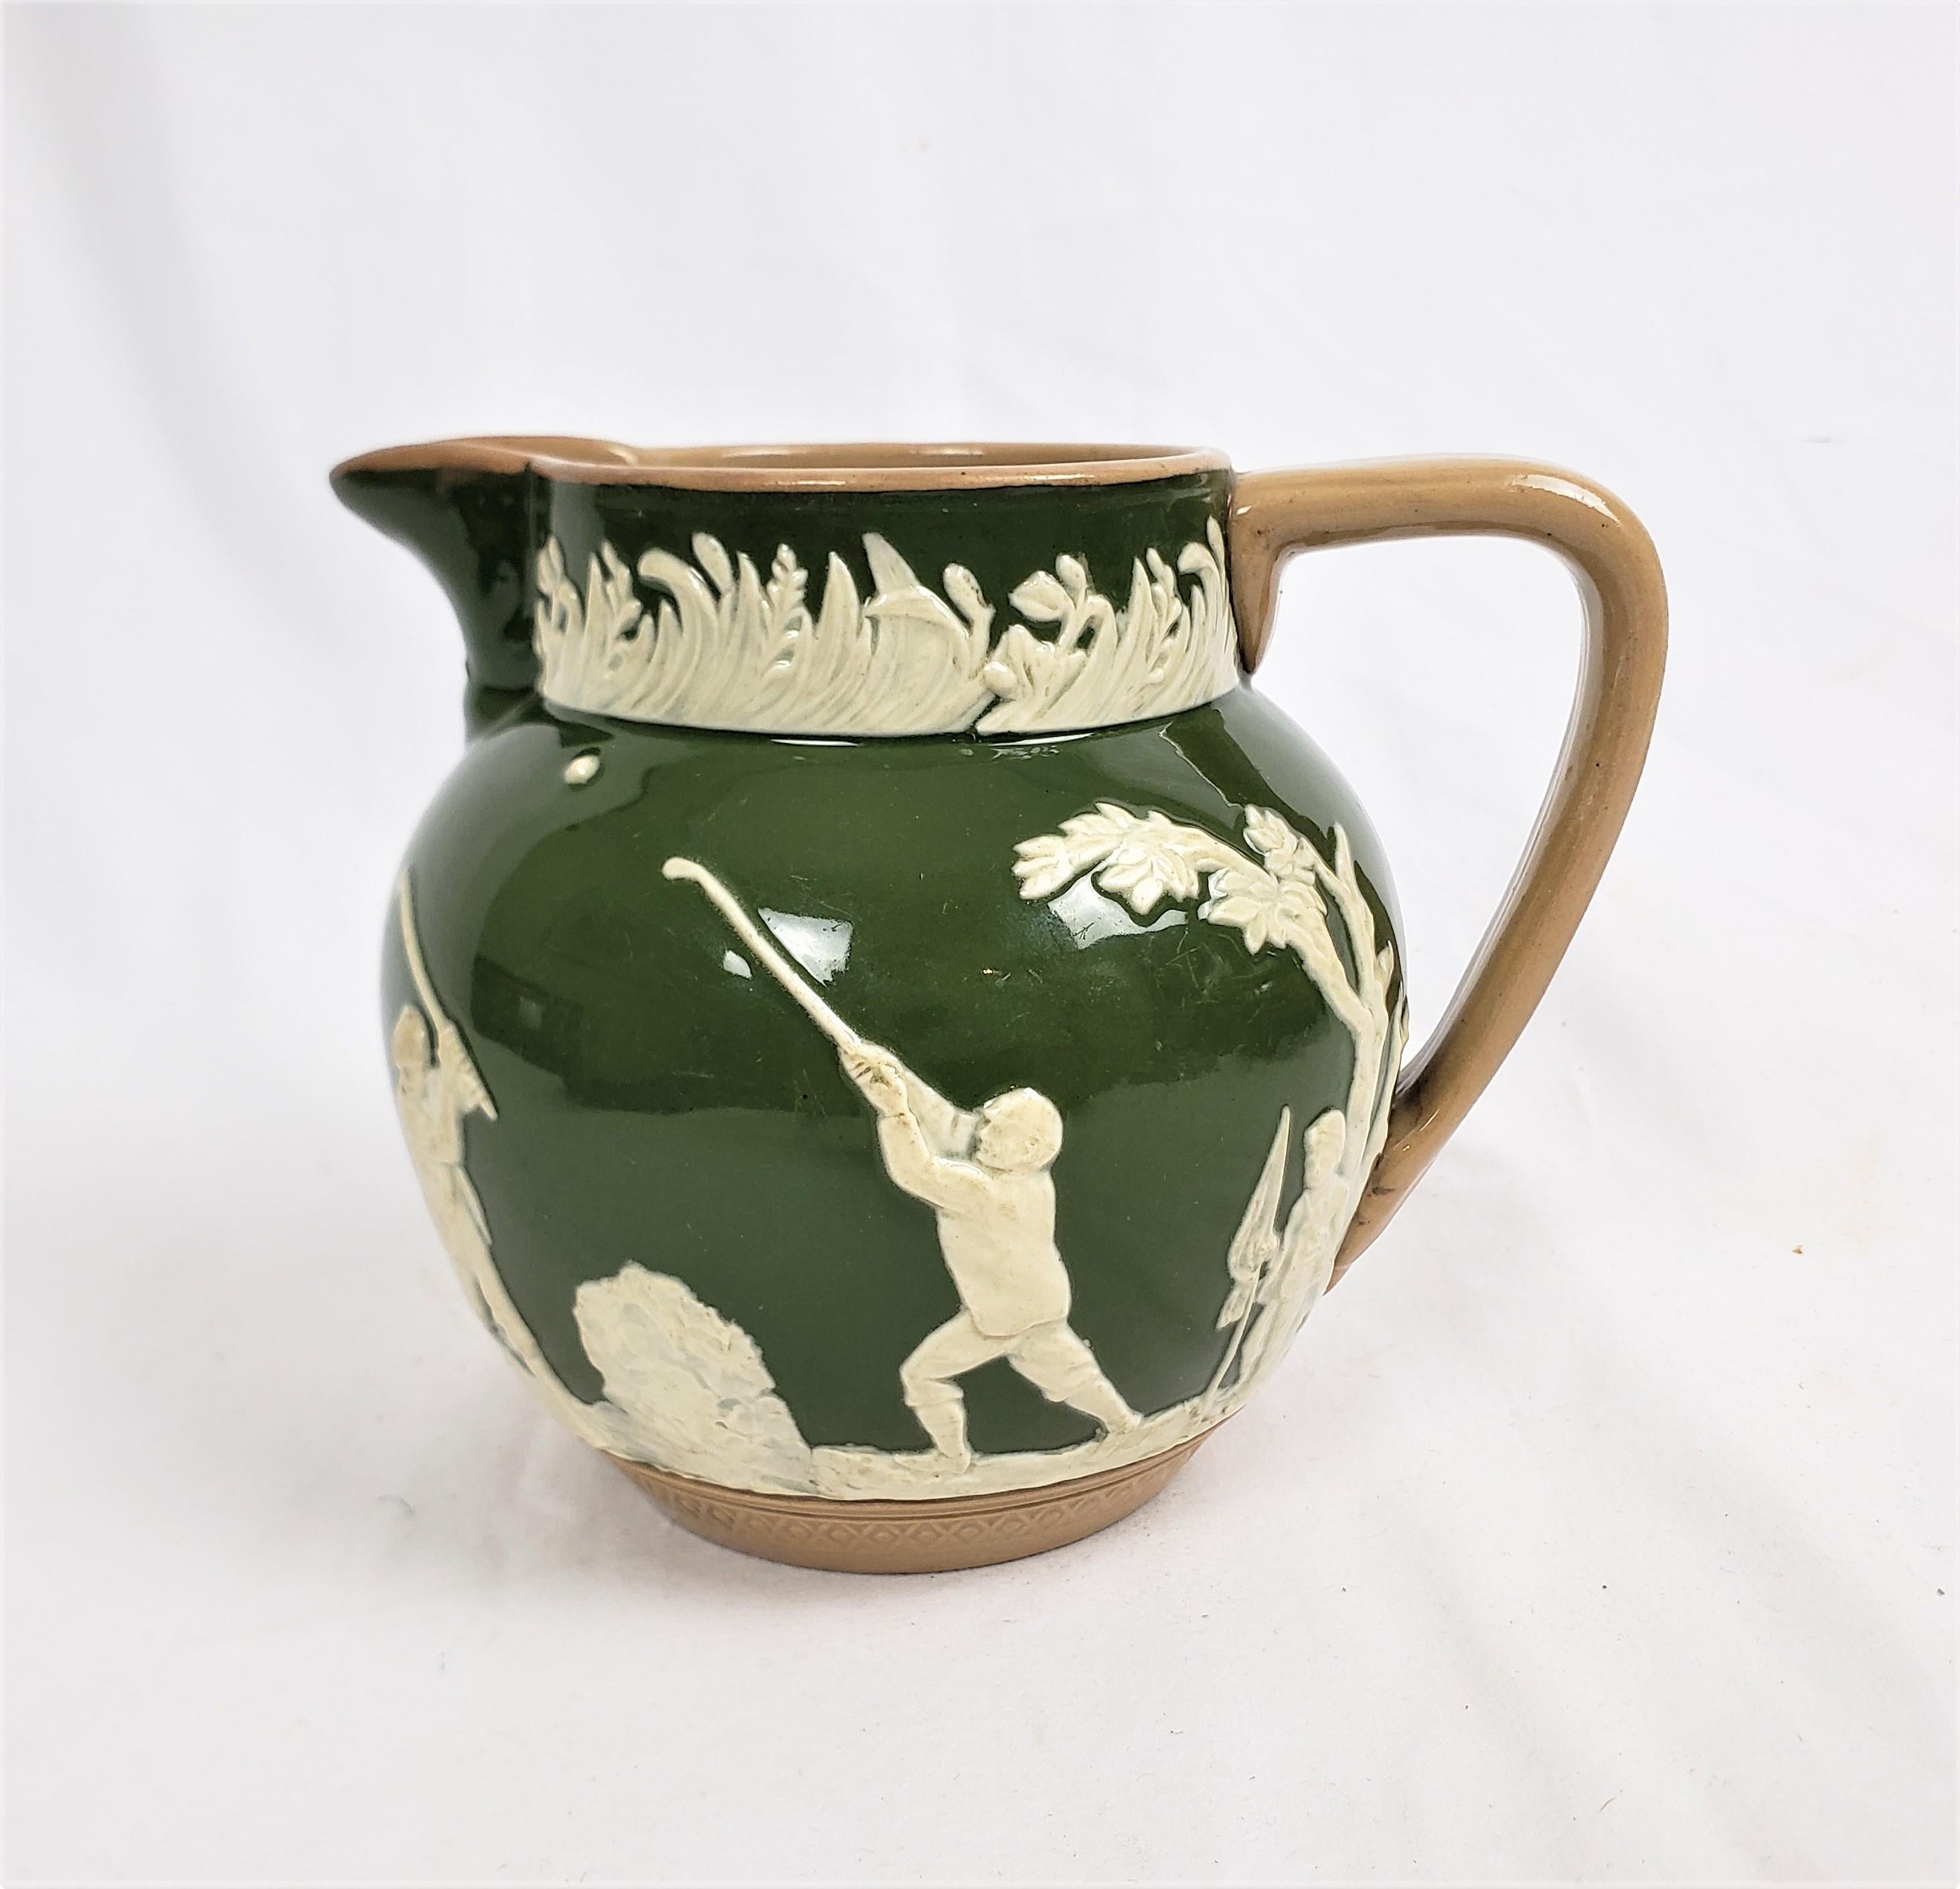 This antique pitcher was made by the well known Copeland Spode factory of England in approximately 1890 in the period Late Victorian style. This small pictcher is composed of pottery with a dark green ground and a series of golfing vignettes done in